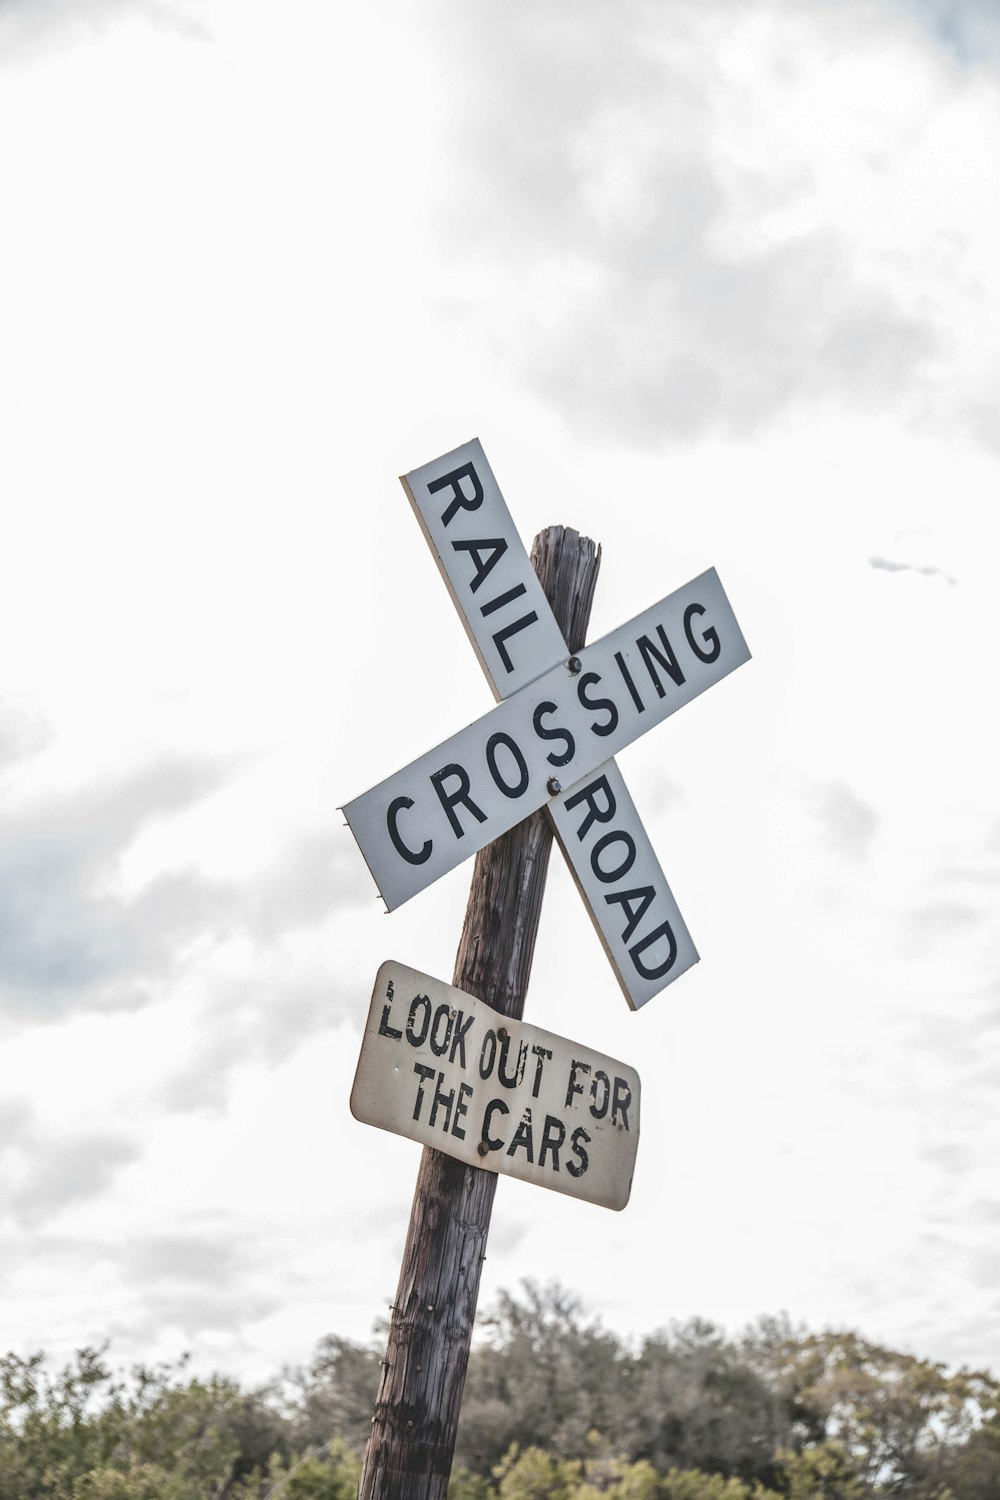 a railroad crossing sign on top of a wooden pole